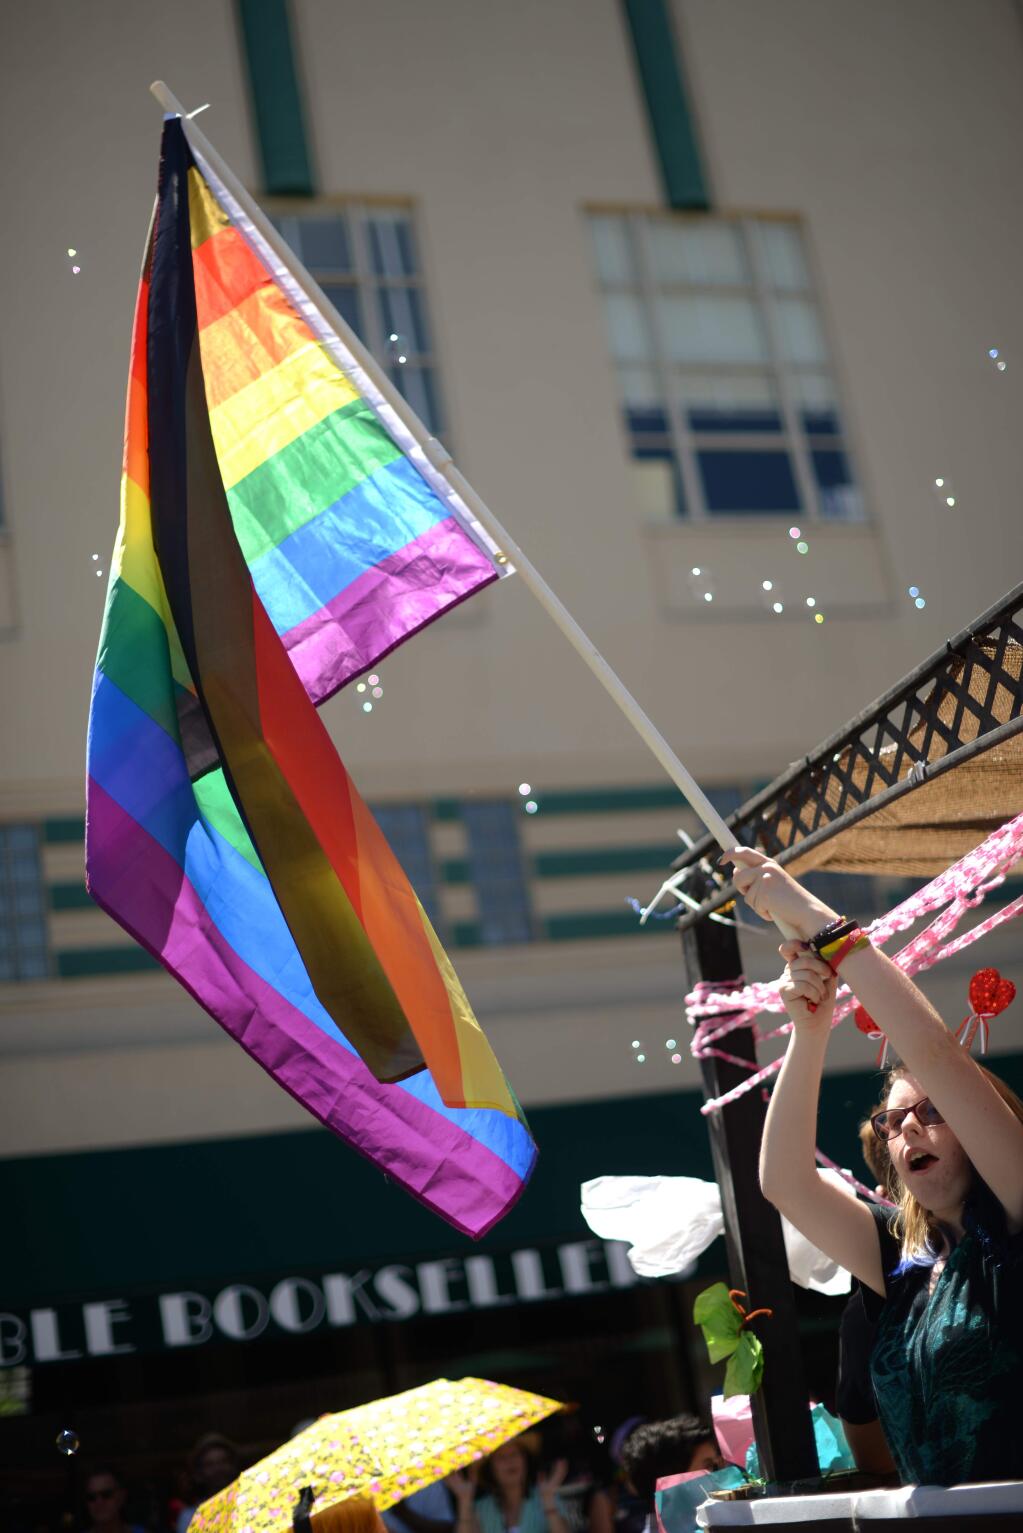 Annanay Chabot, 14, rides on the North Bay LGBTQI Families float during the 31st annual Sonoma County Pride Festival held for the first time in downtown Santa Rosa, California on Saturday, June 2, 2018. (ERIK CASTRO/ FOR THE PD)